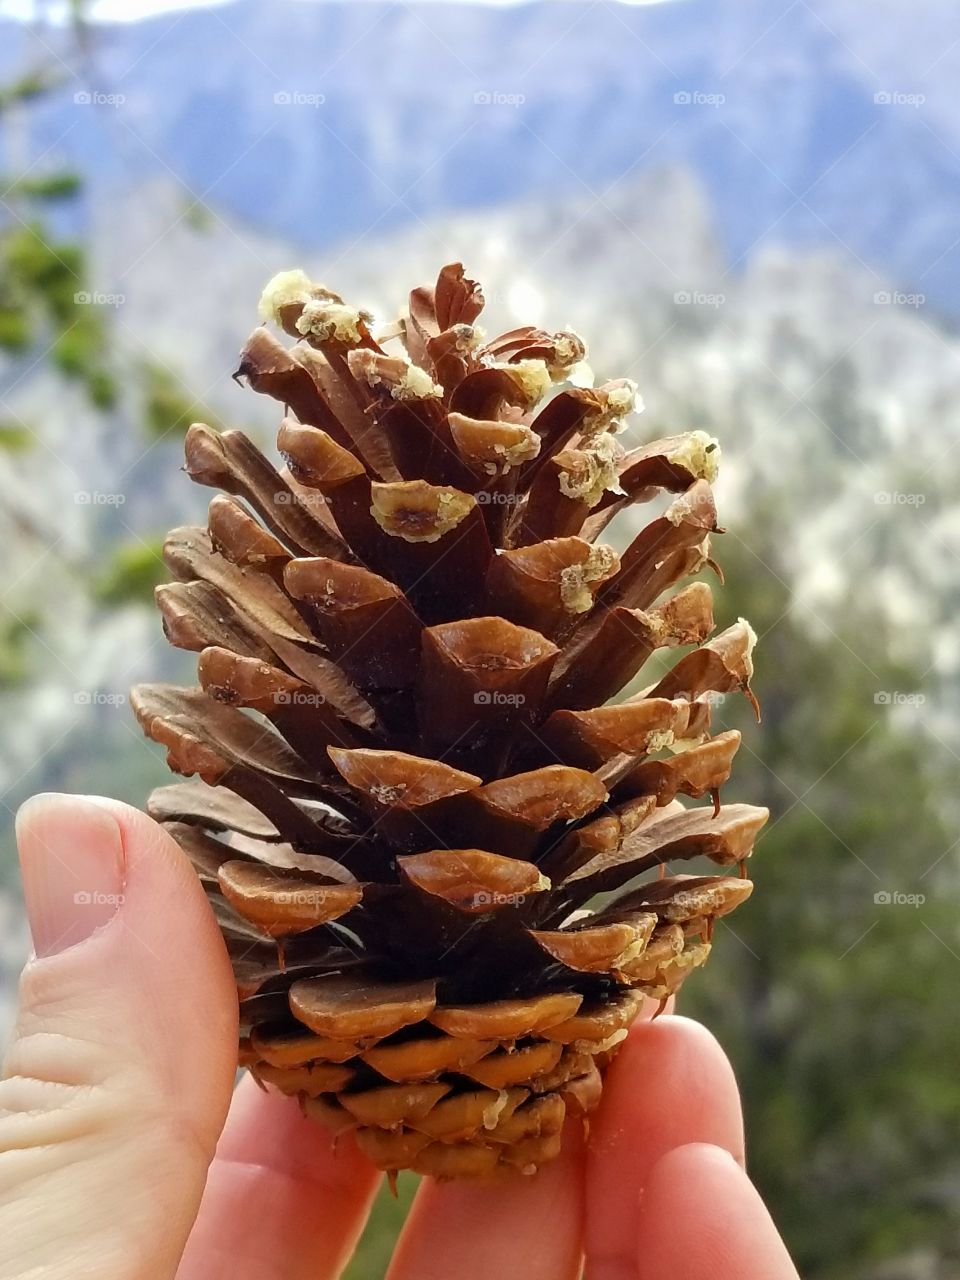 Pine cones are a work of art.